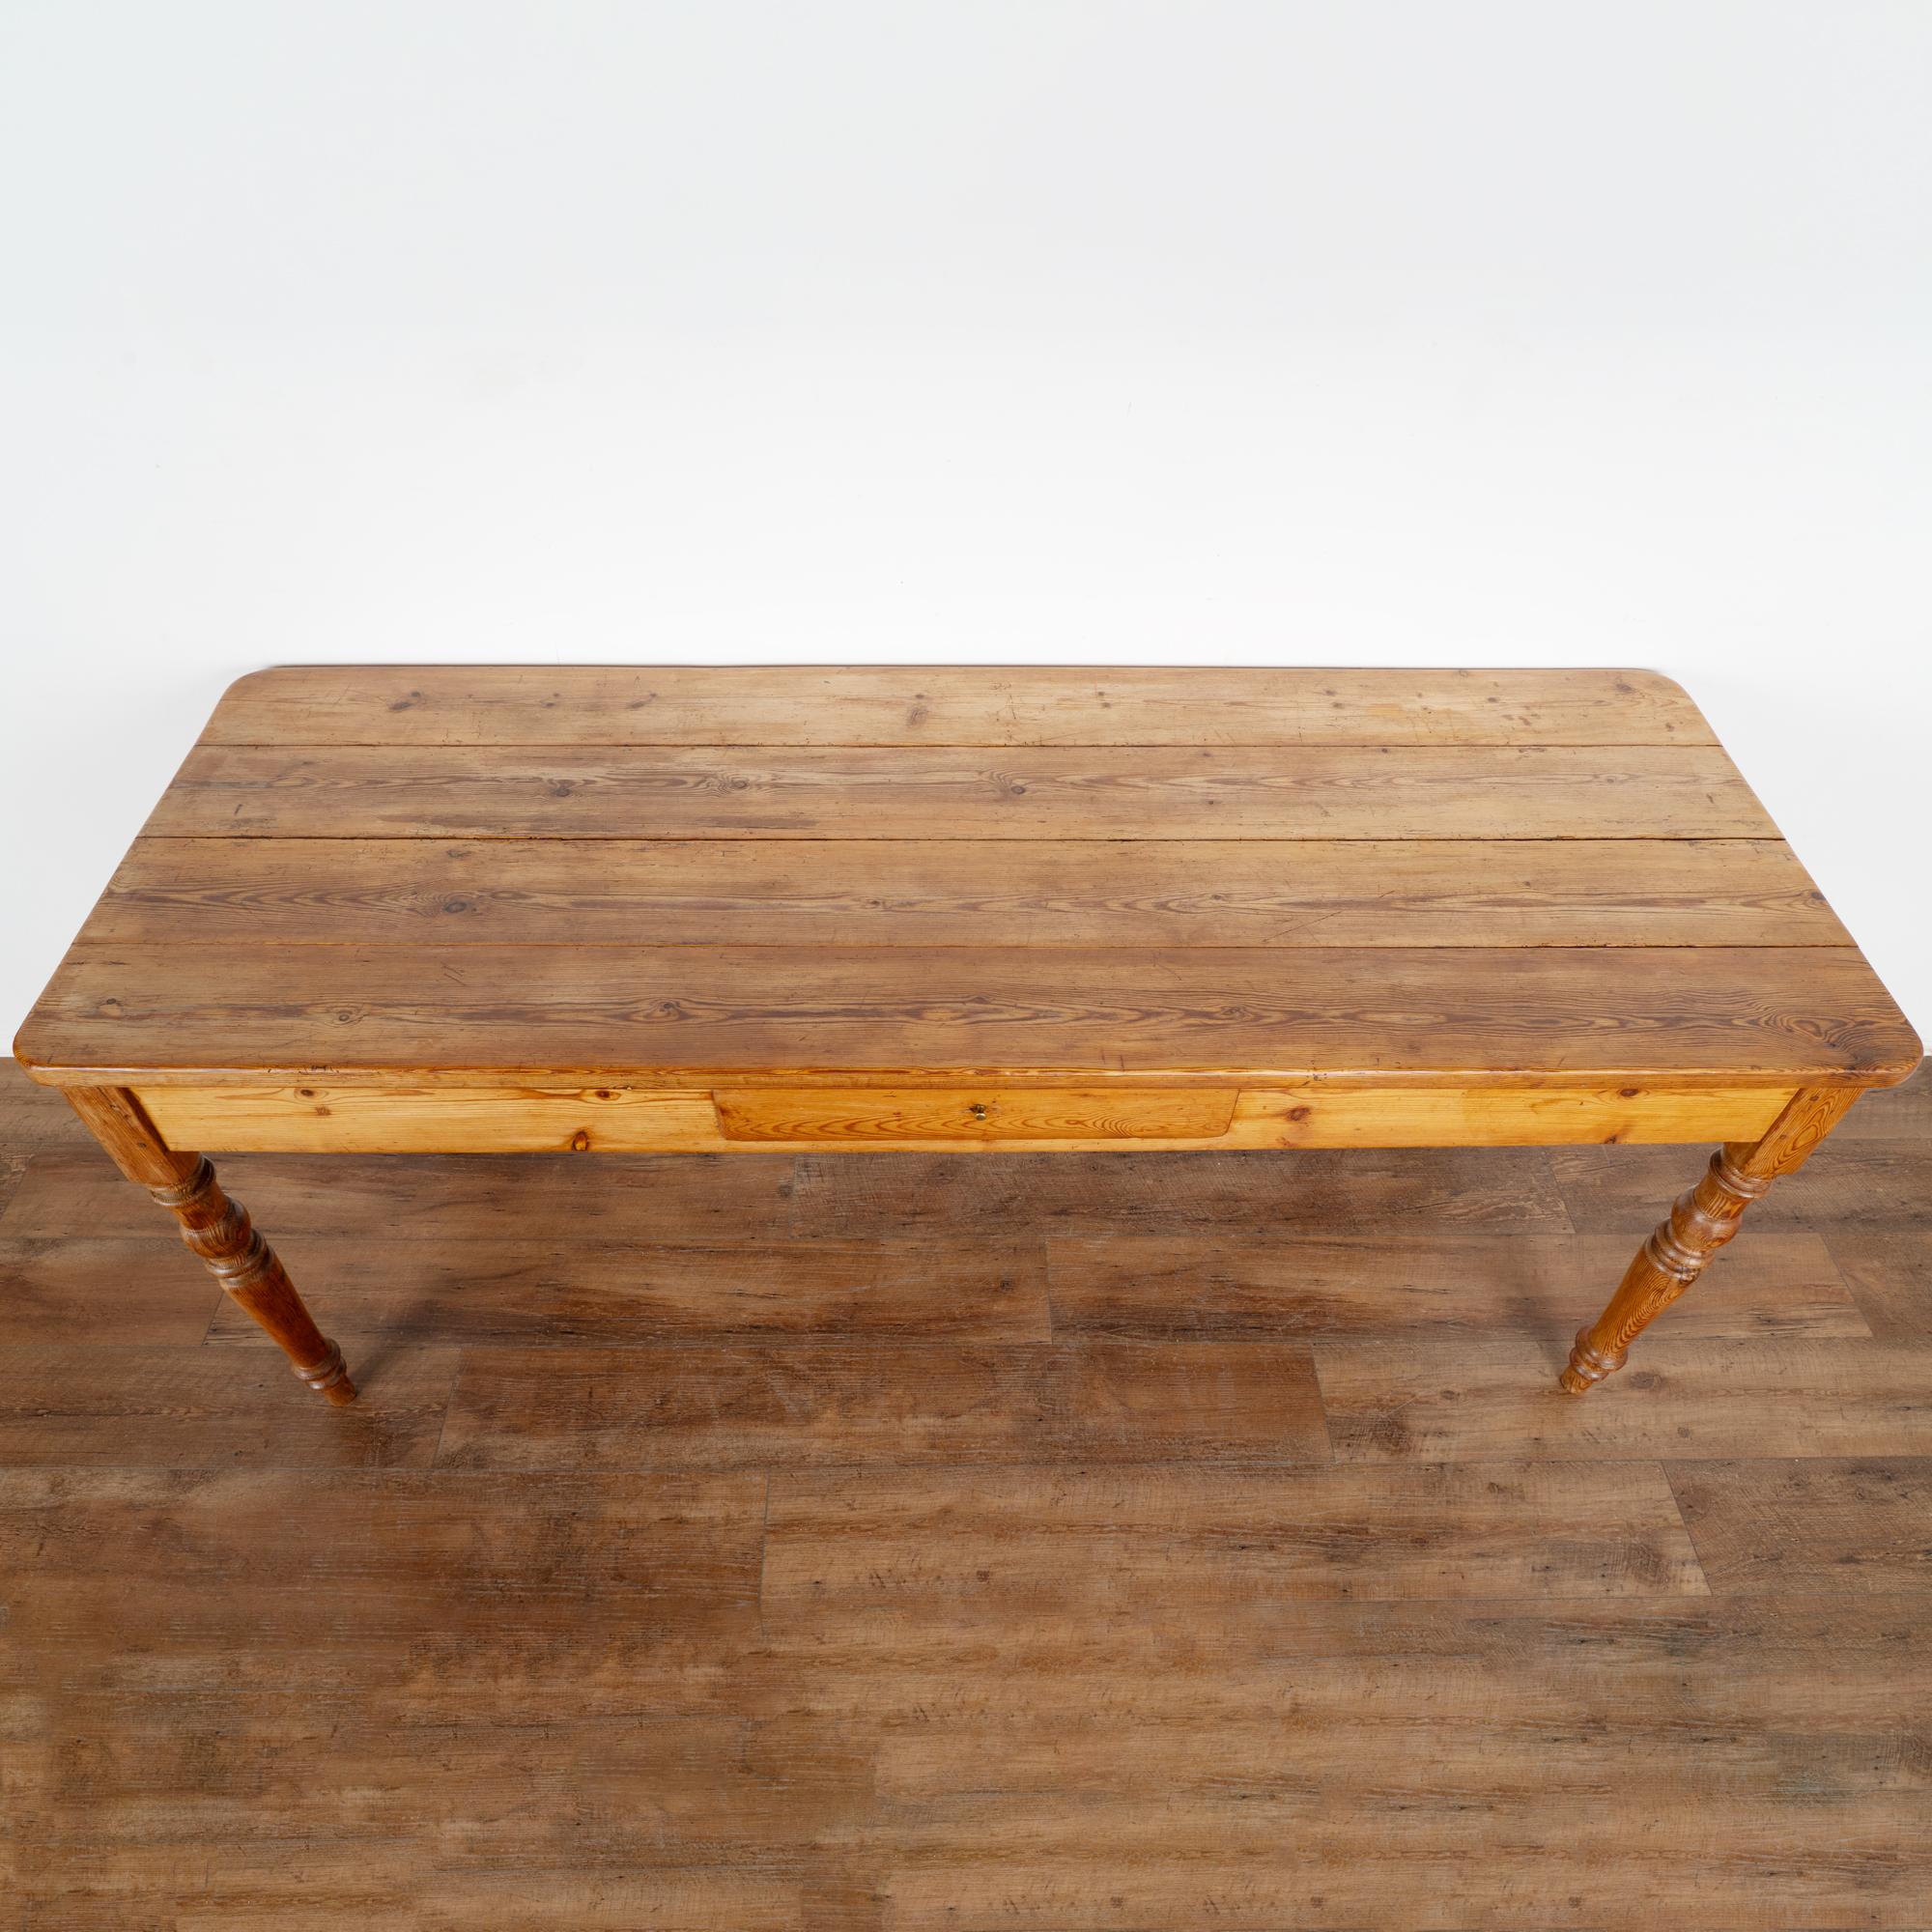 Wood Pine Farm Table Console With Drawer, Denmark circa 1860